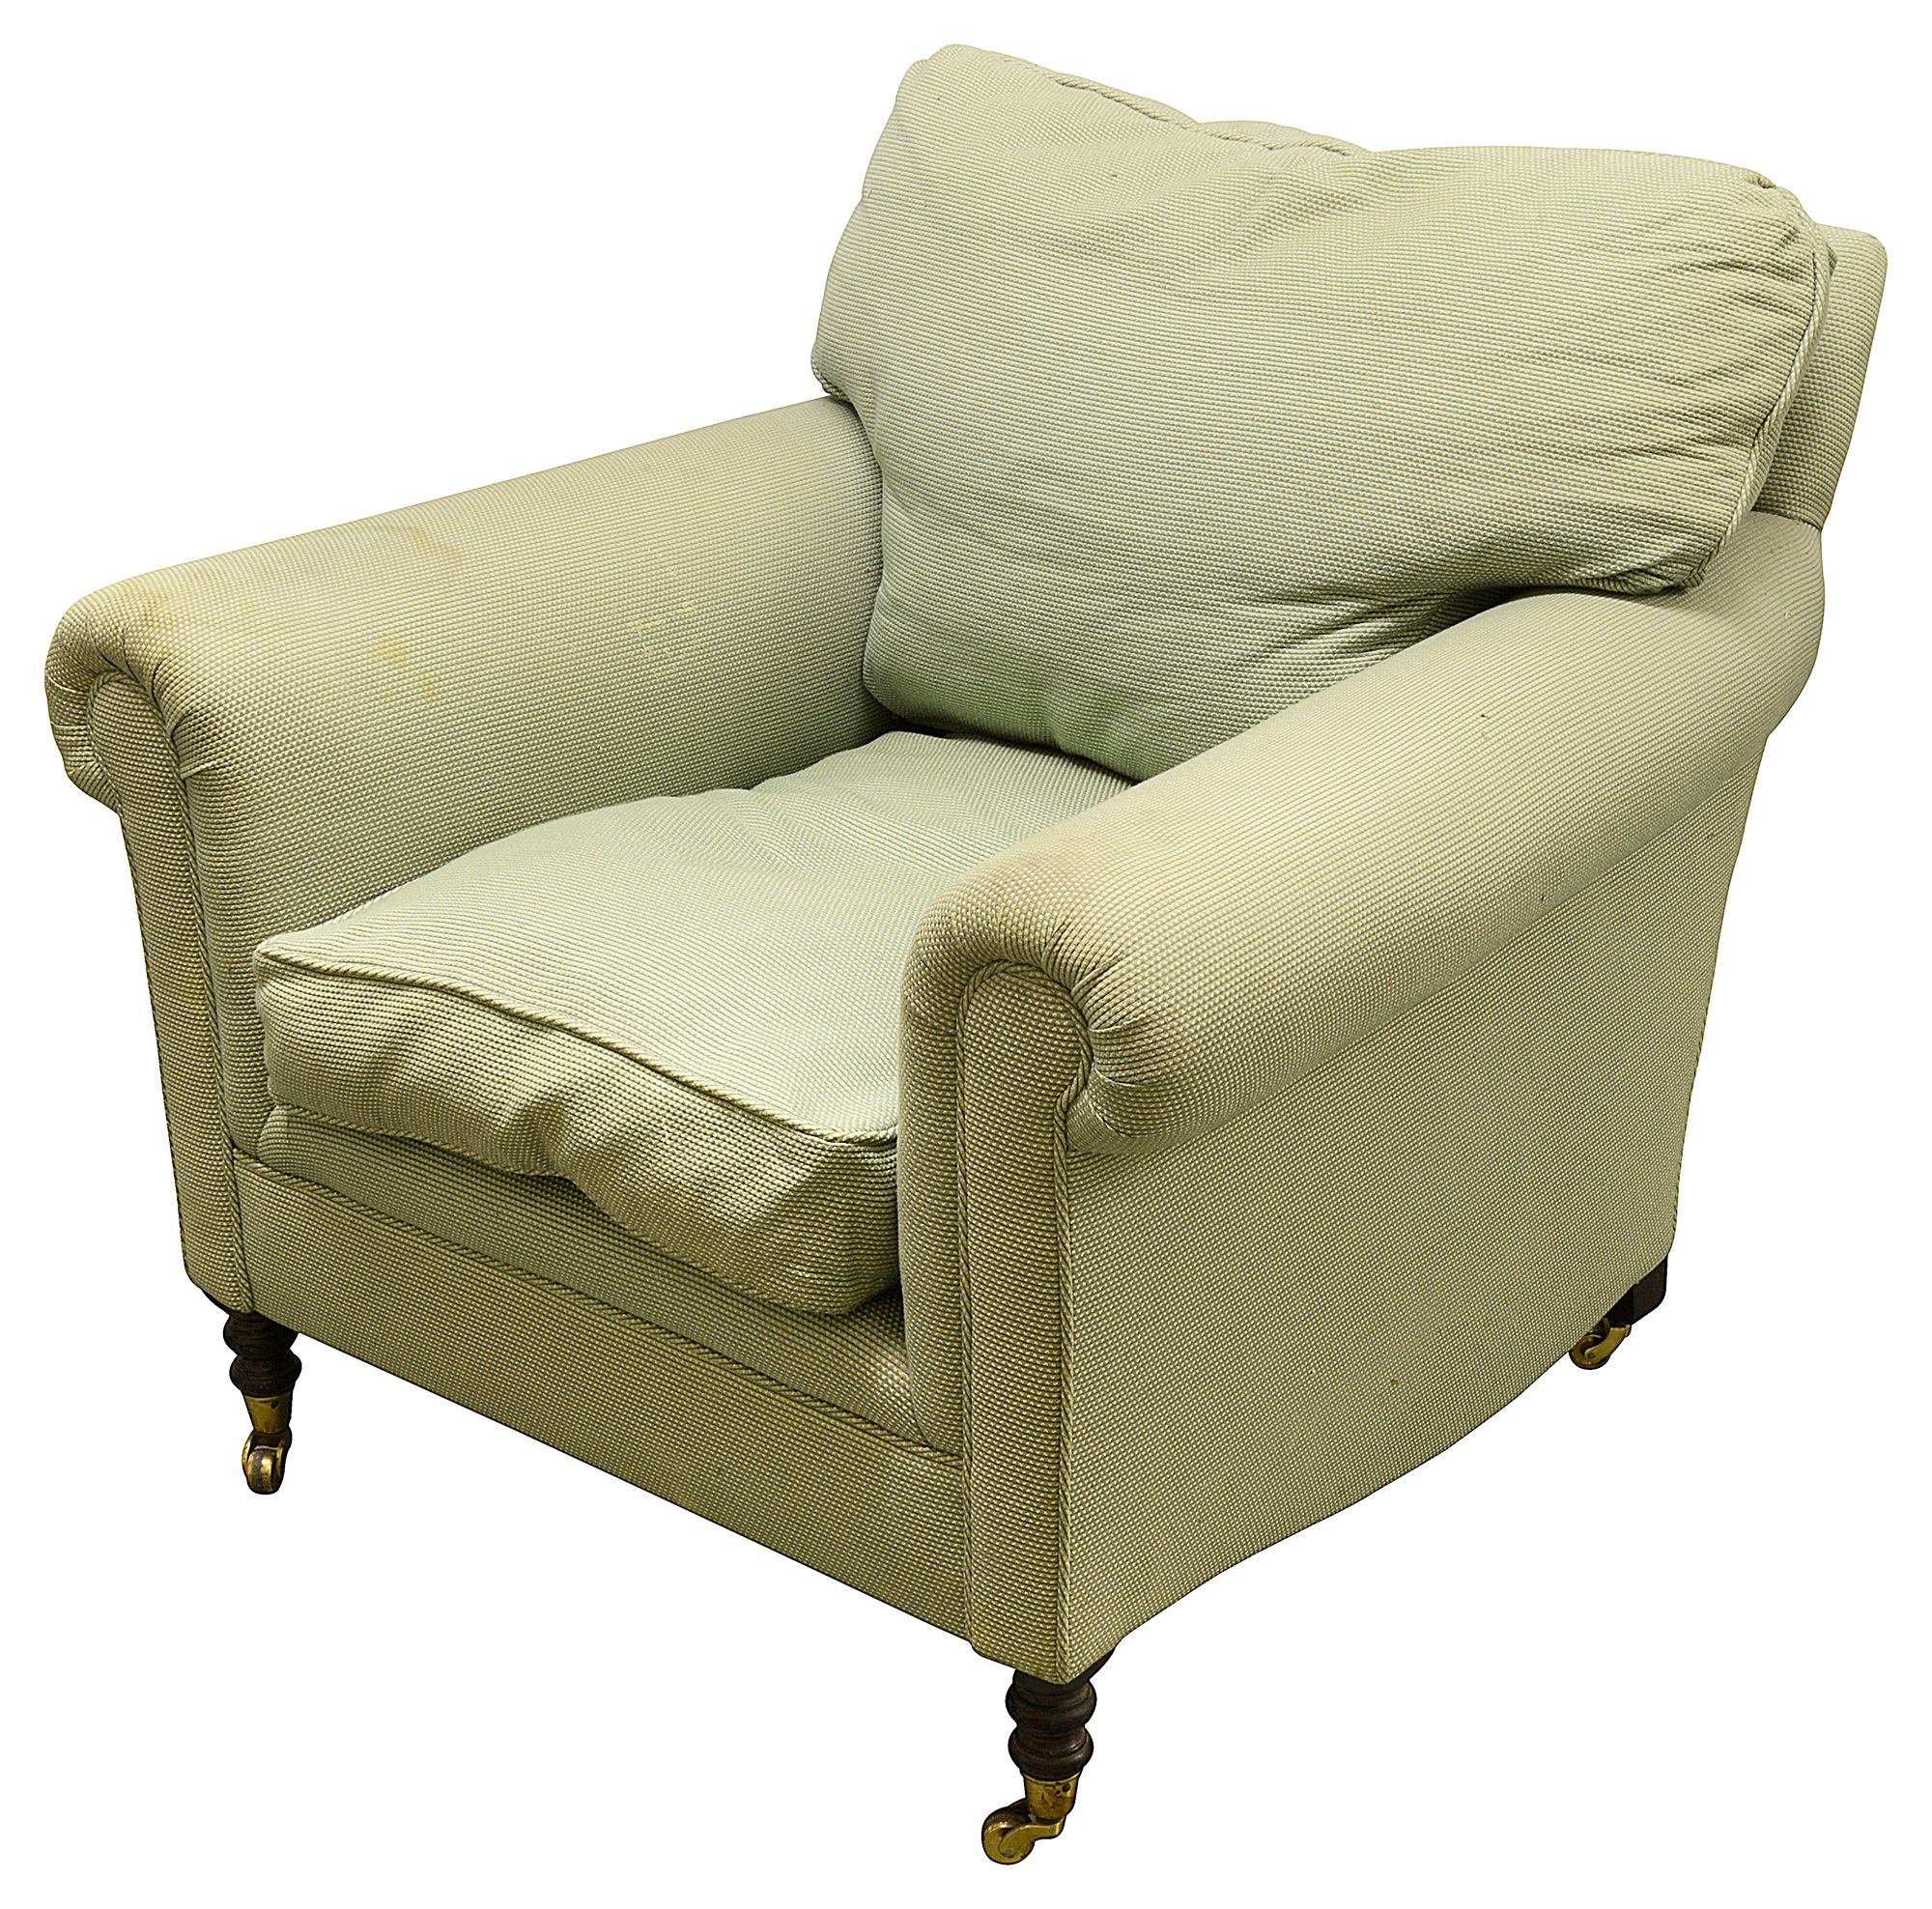 A George Smith upholstered armchair - Image 2 of 3